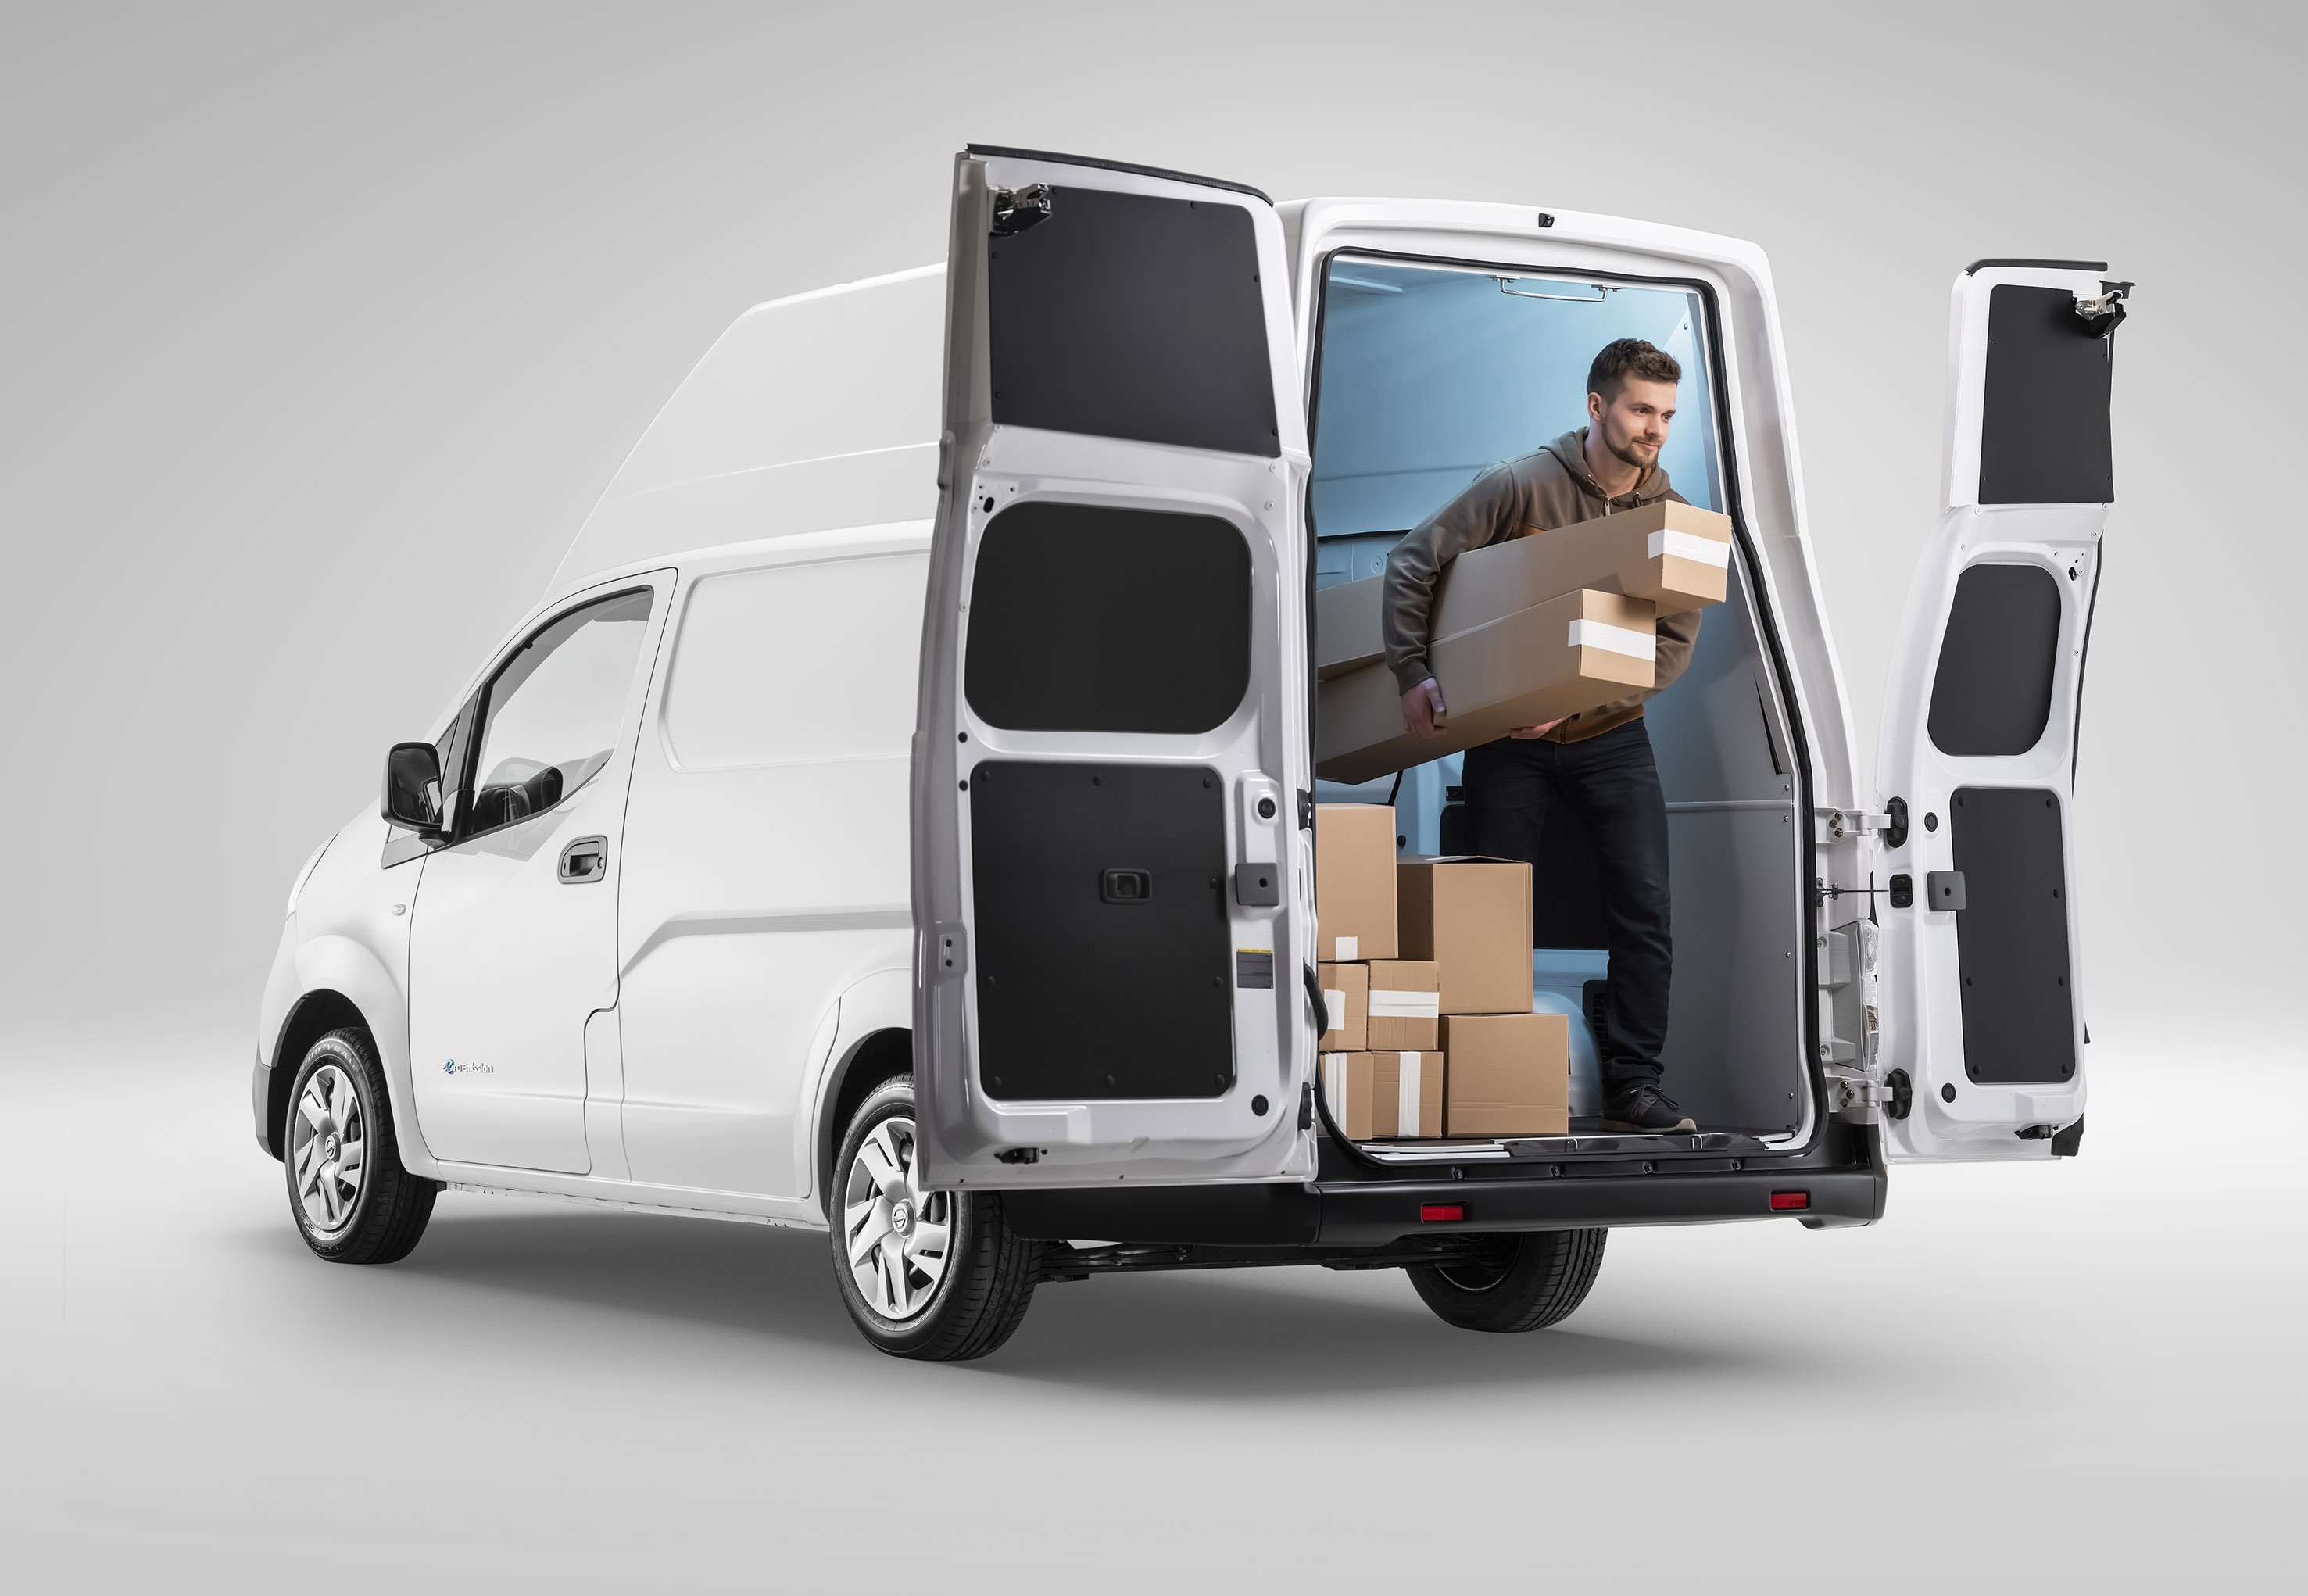 Bevan Group enters the electric vehicle arena with high-volume Nissan e-NV200 conversion